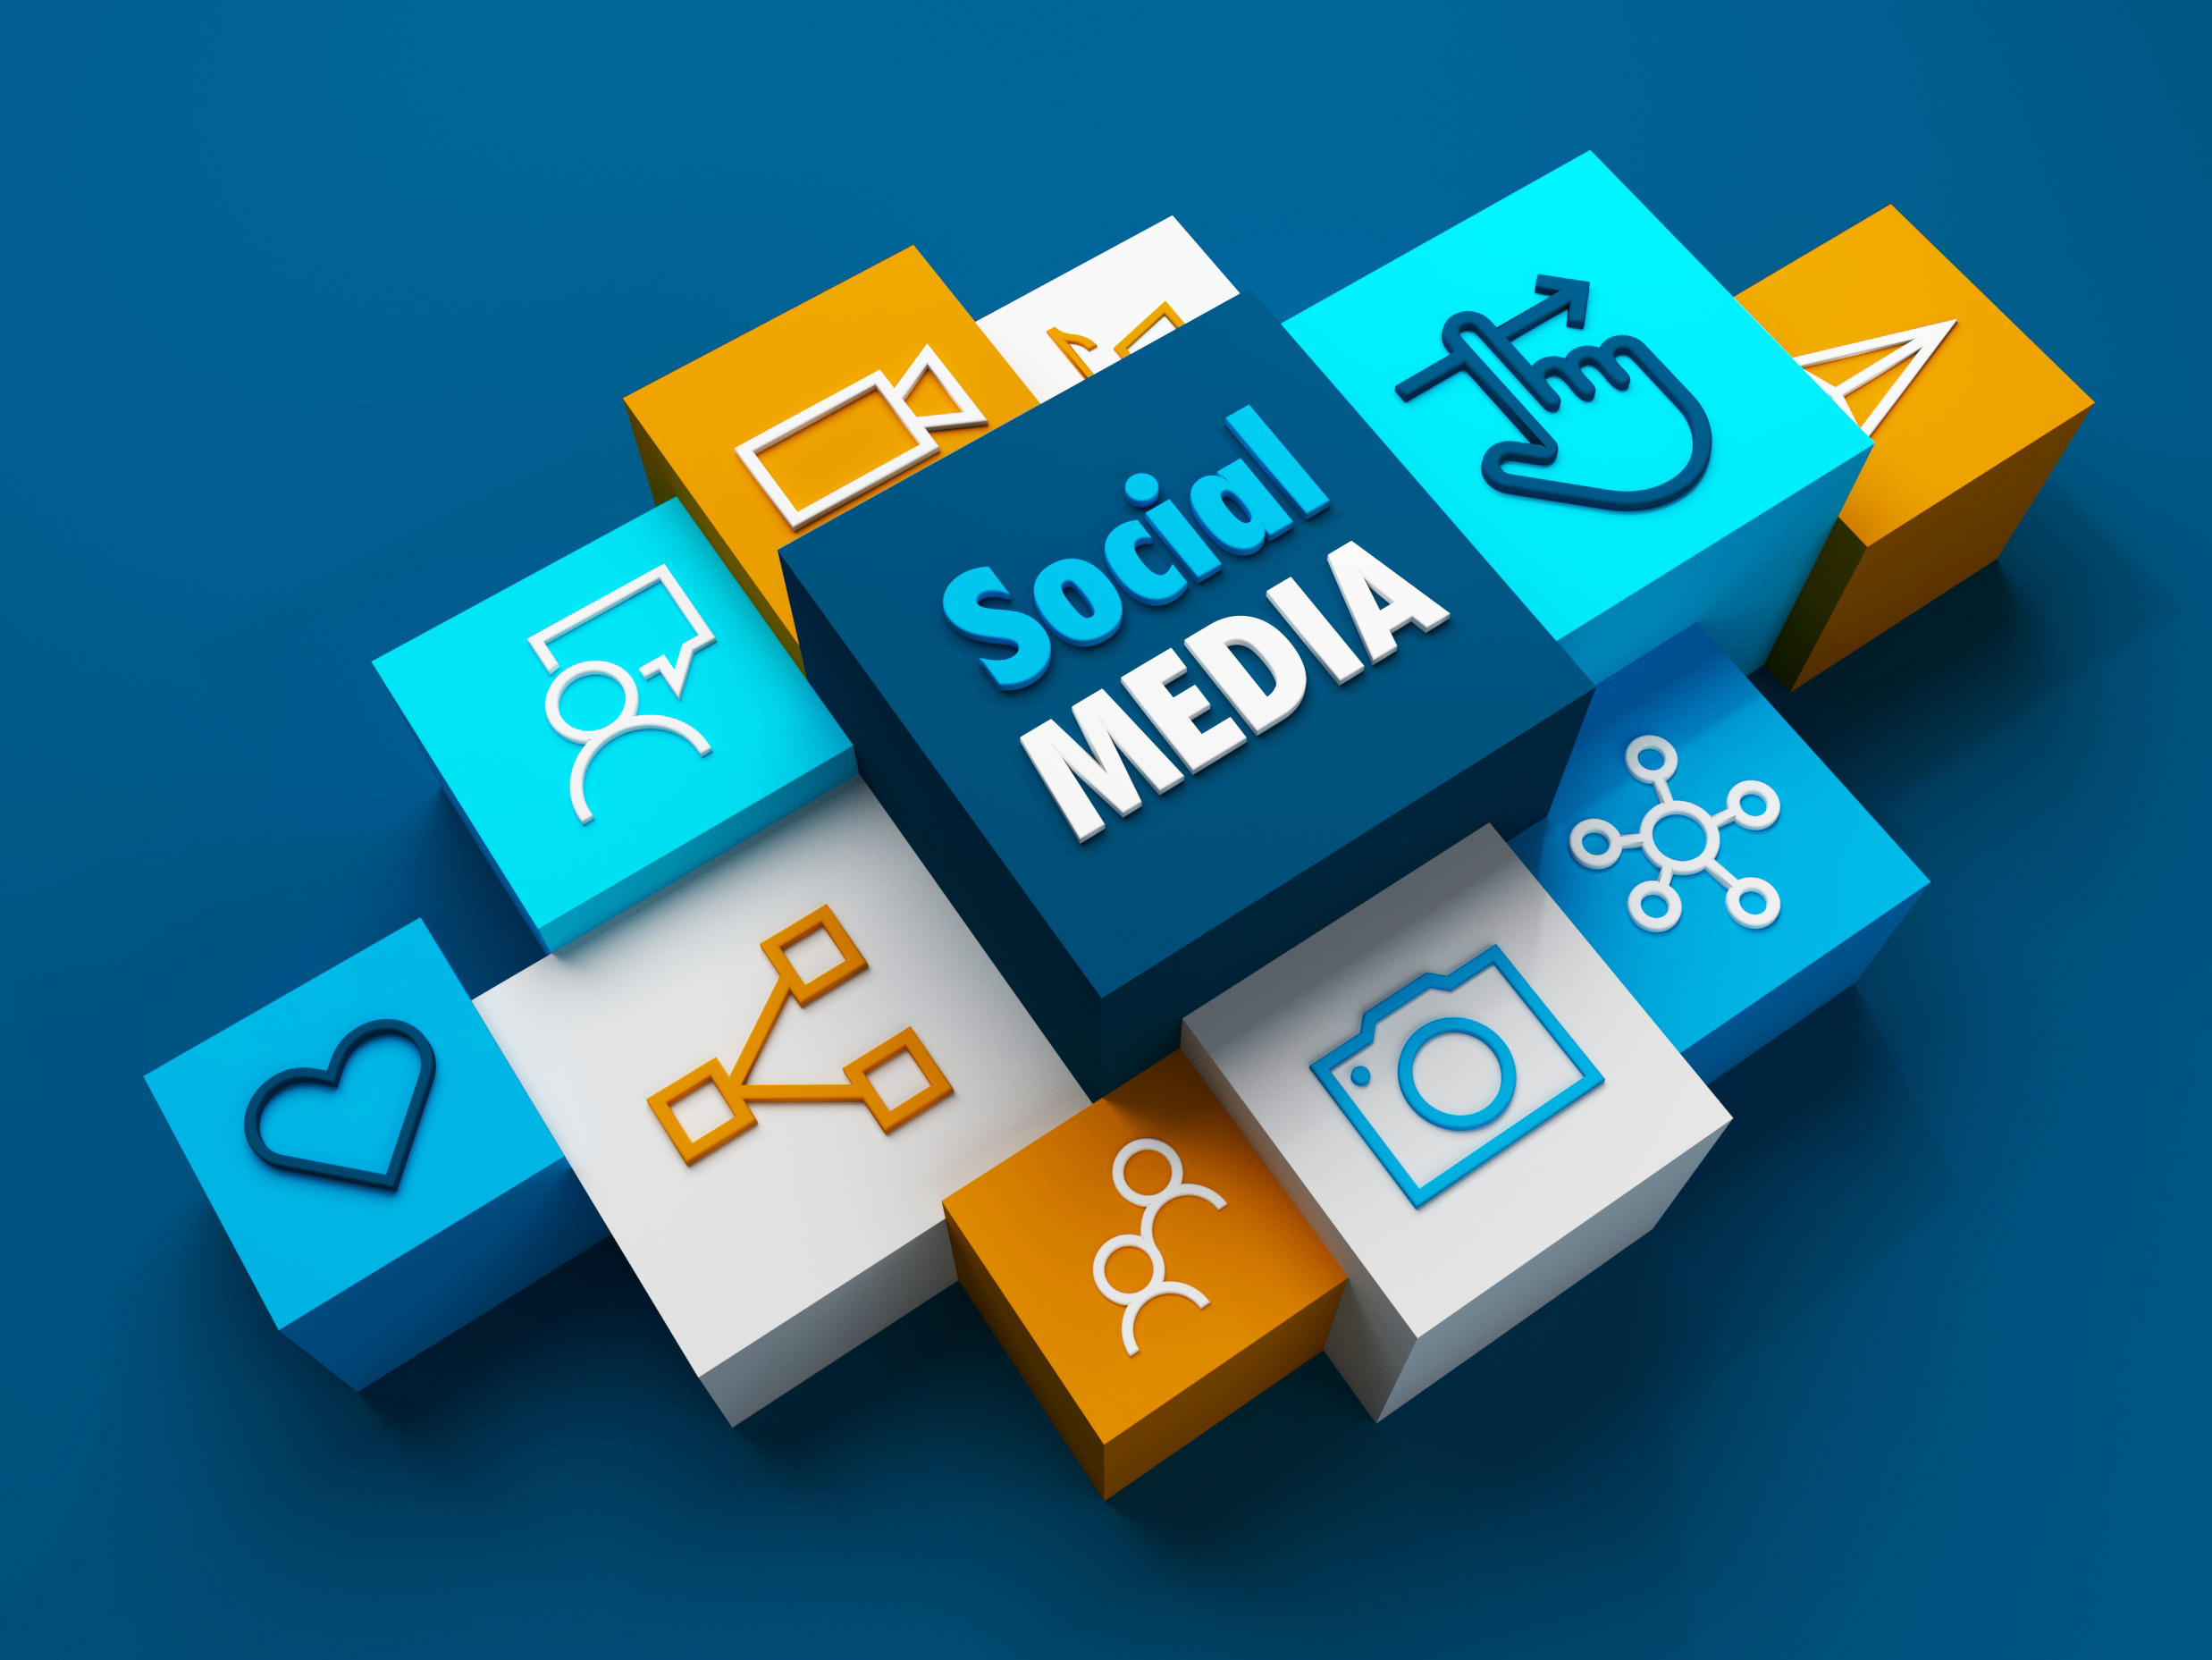 Social media marketing for your online store to get more prospective customers, create ads, banner ads, boost sales, and have social media posts